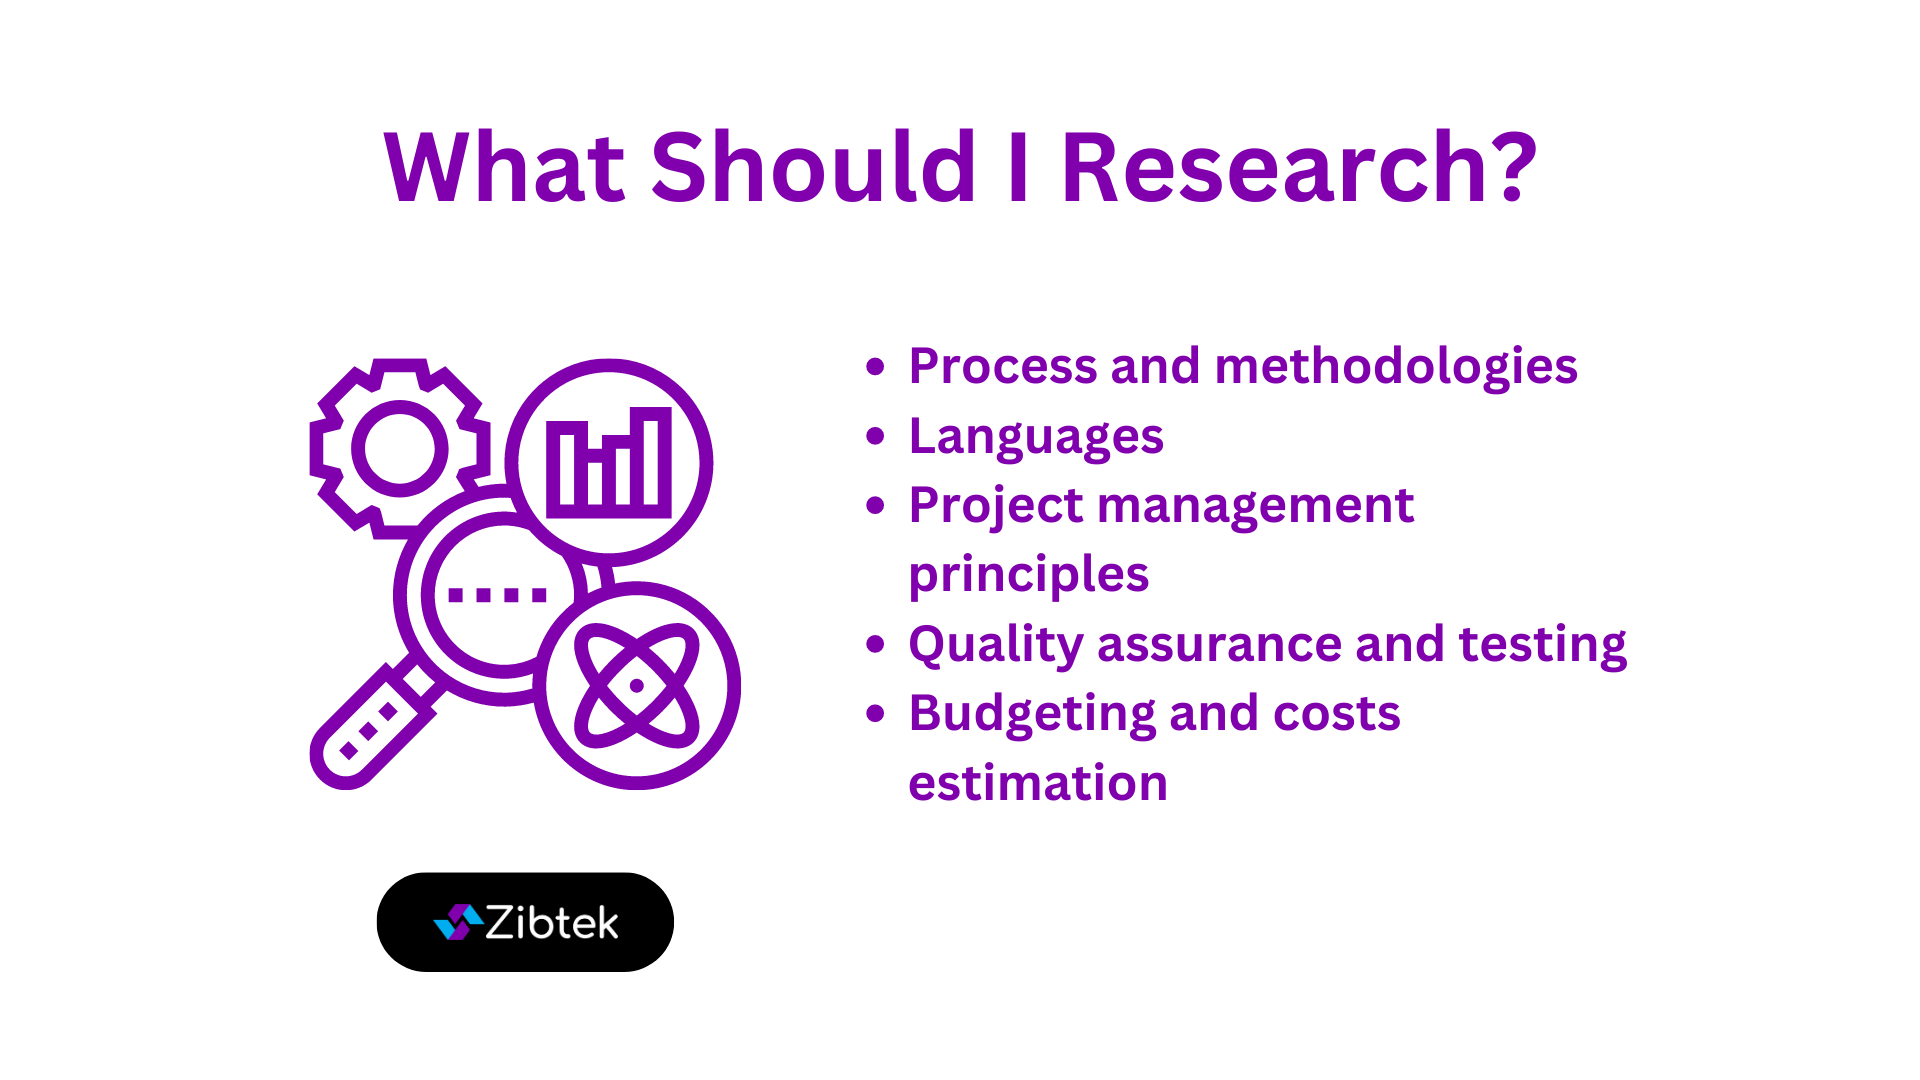 Steps to research in the software development process